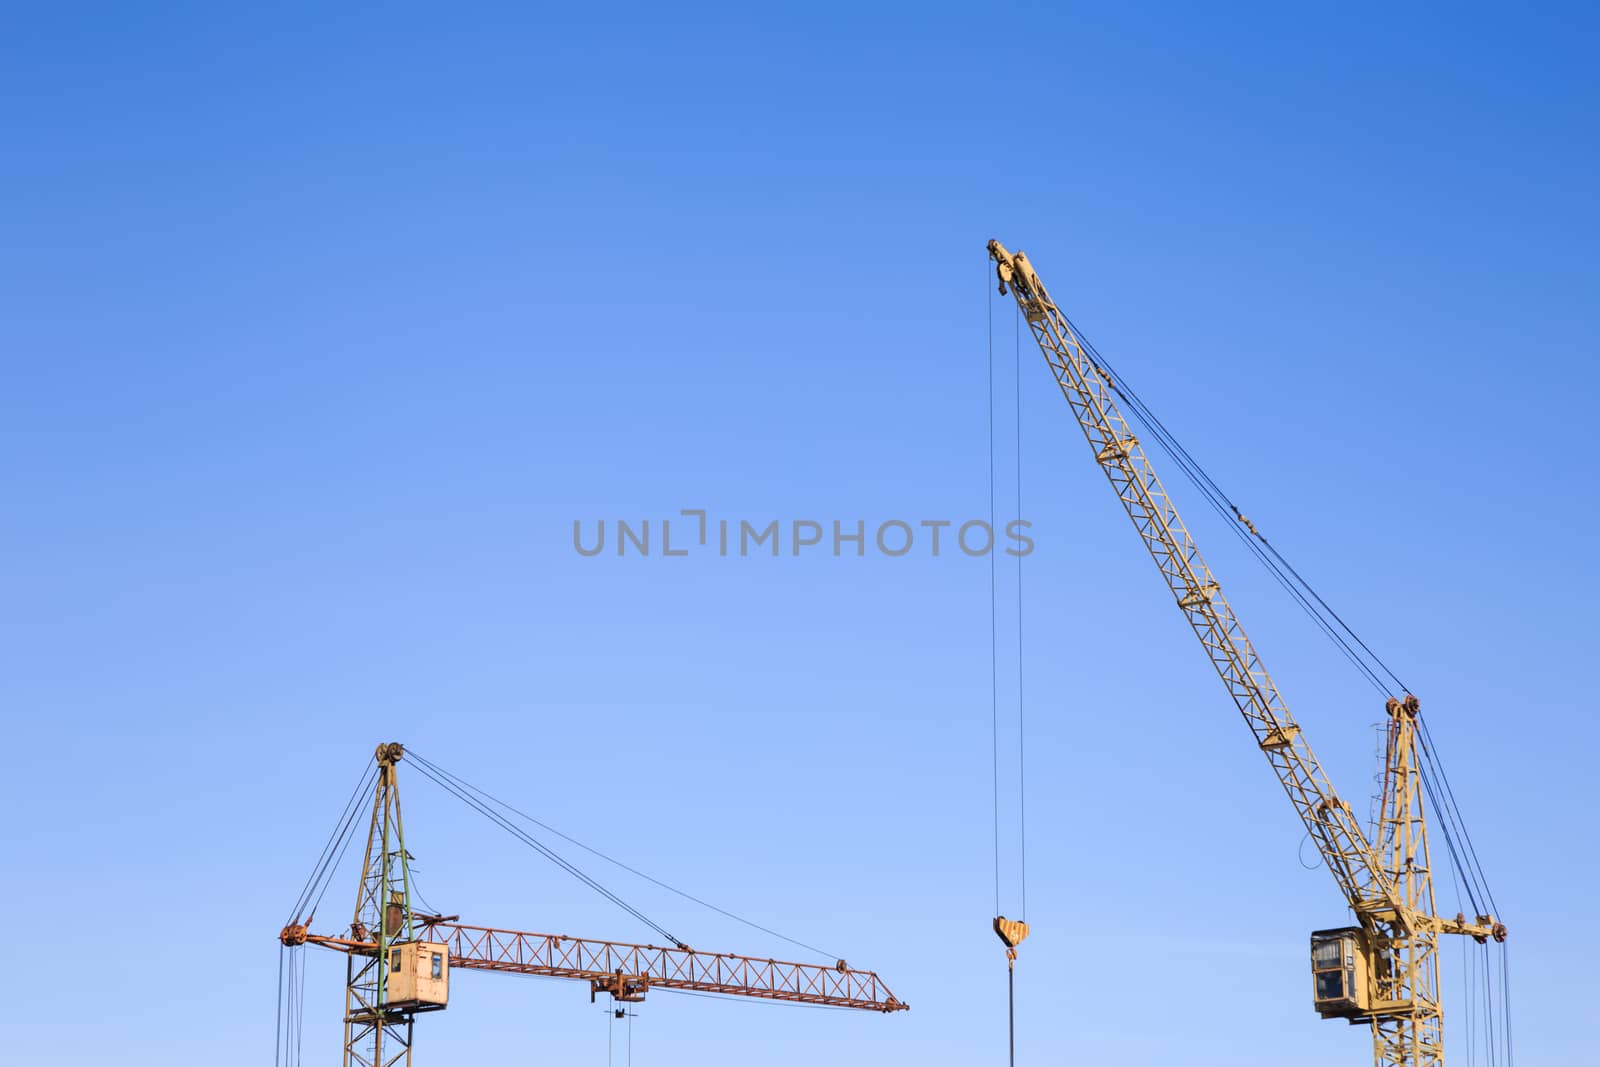 Two cranes on a light blue sky background by DamantisZ